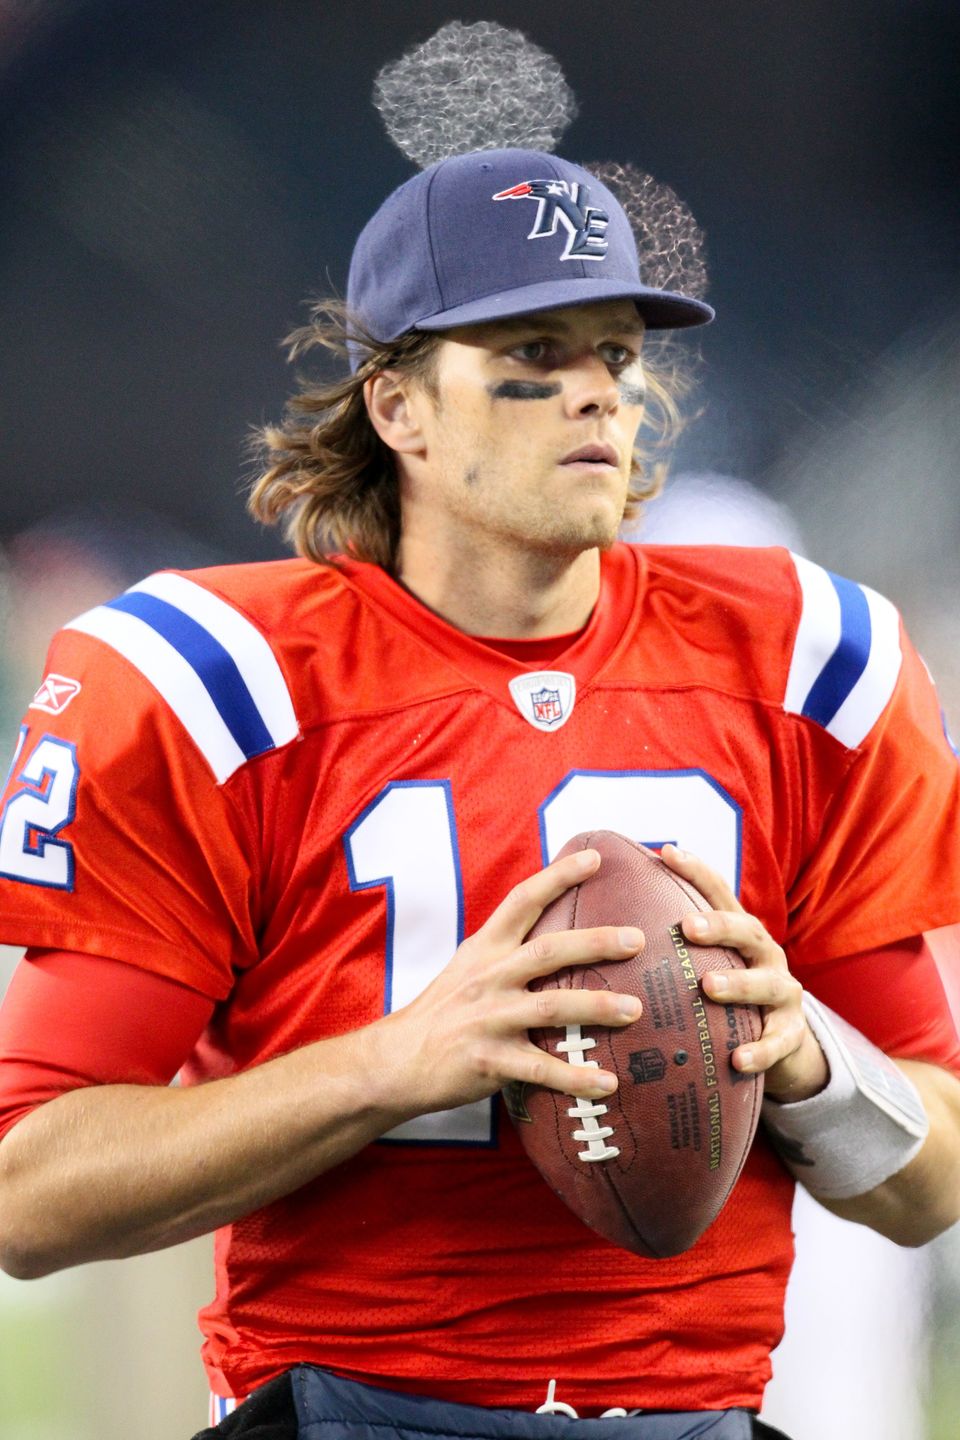 Tom Brady Has Had Way More Hairstyles Than Super Bowl Wins | HuffPost Life